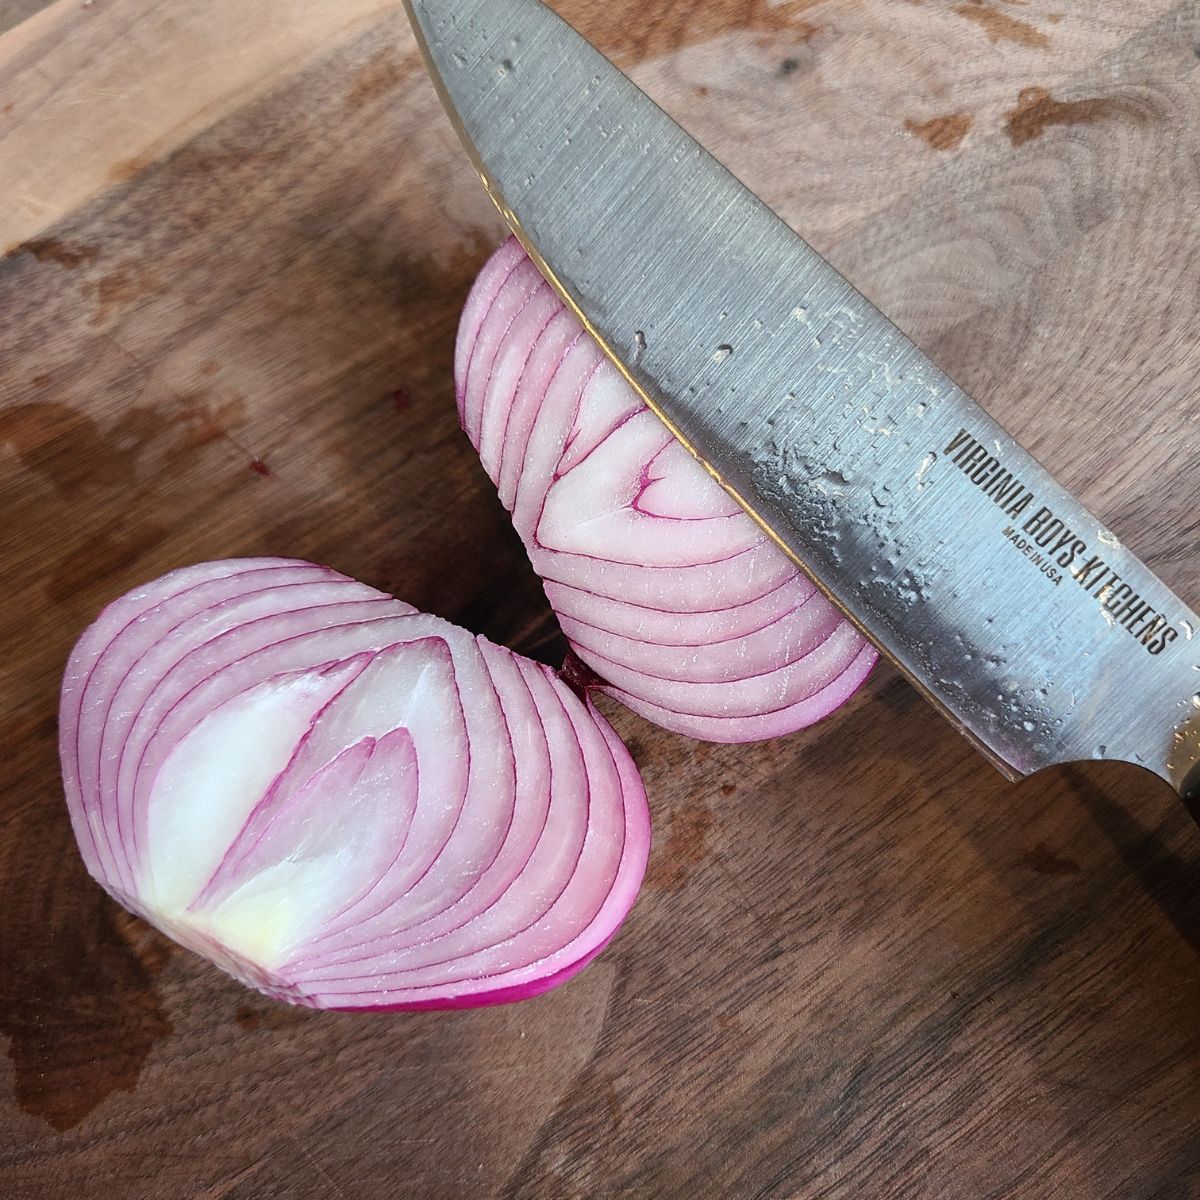 How To Cut Onions Without Crying - Pro Tips and Tricks You Didn't Know